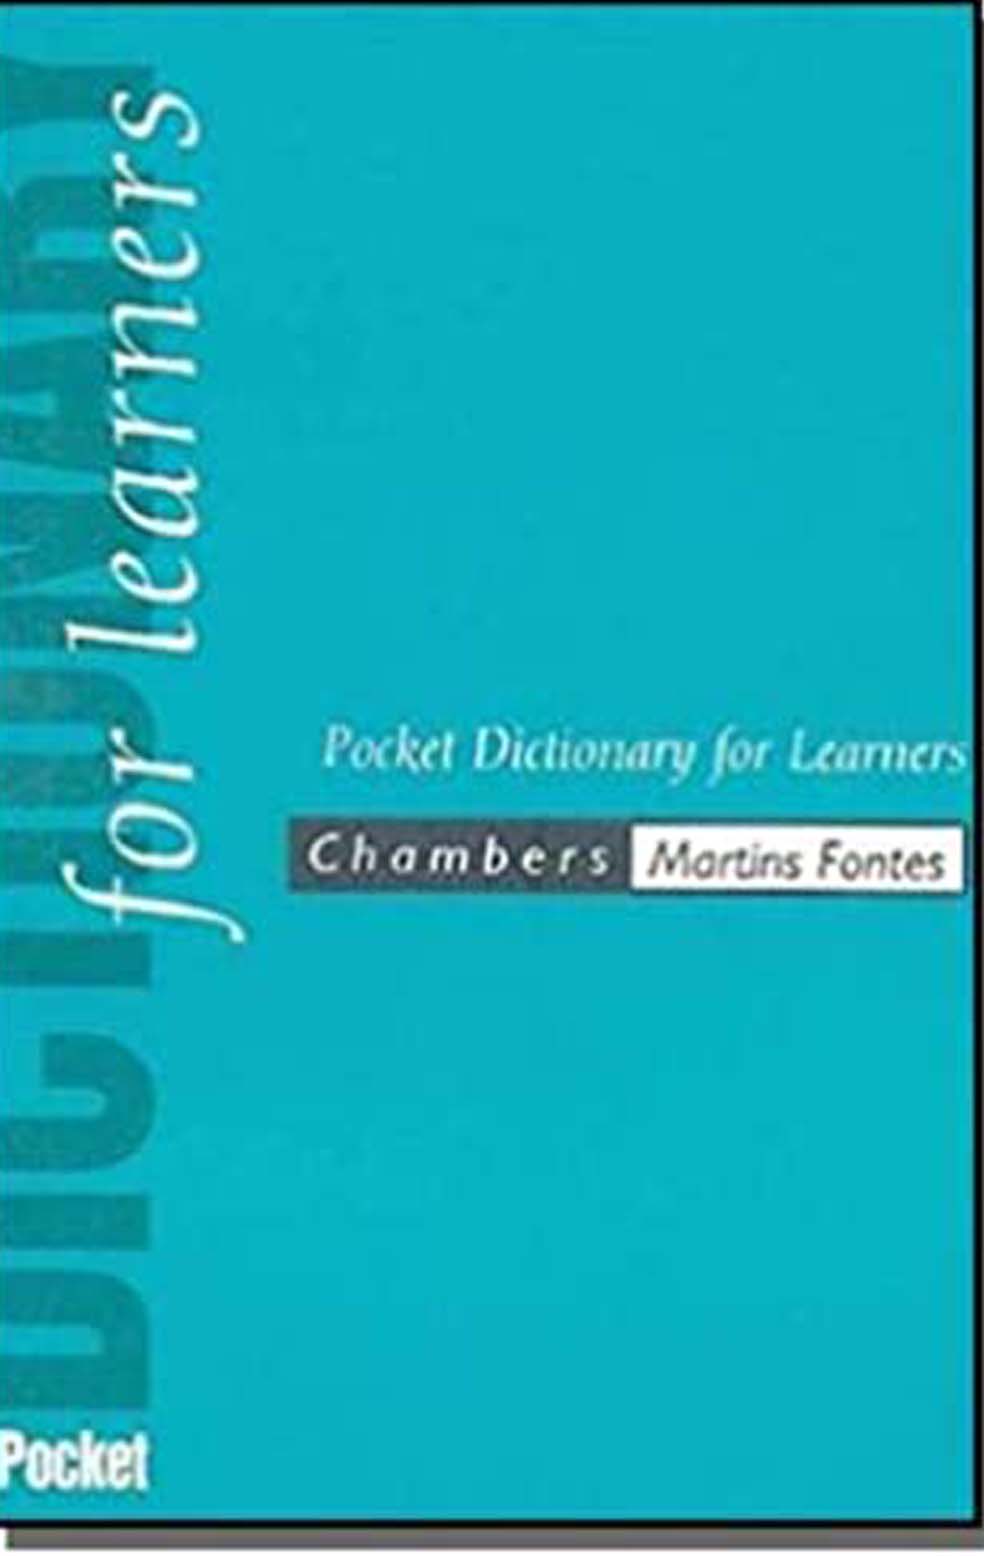 Chambers - Pocket Dictionary for Learners  - Martins Fontes